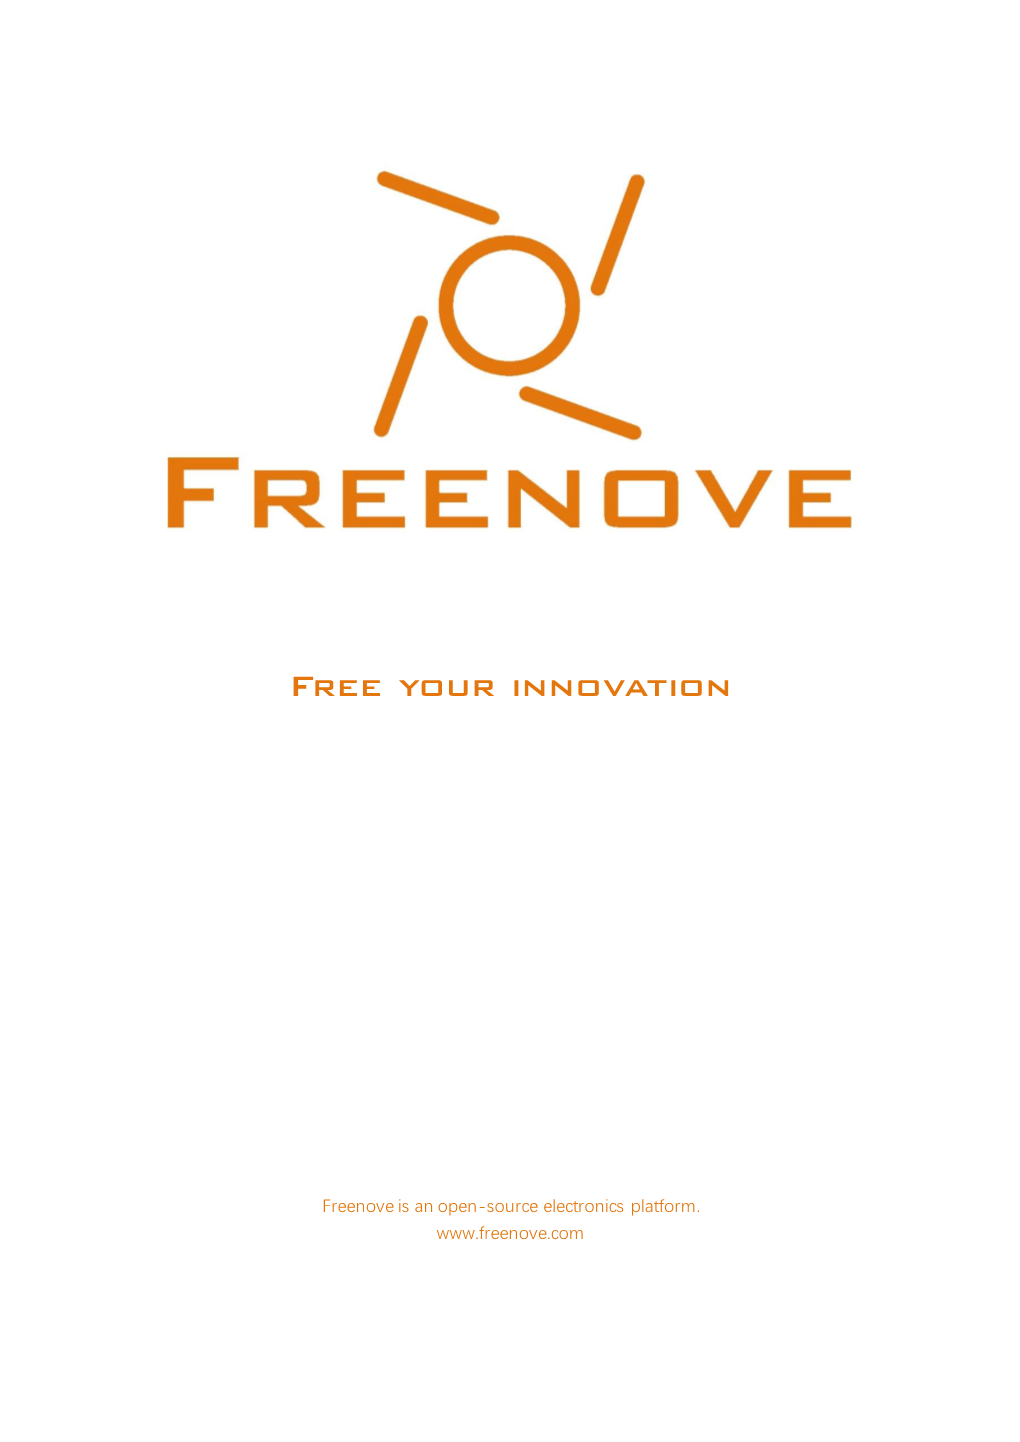 Free Your Innovation